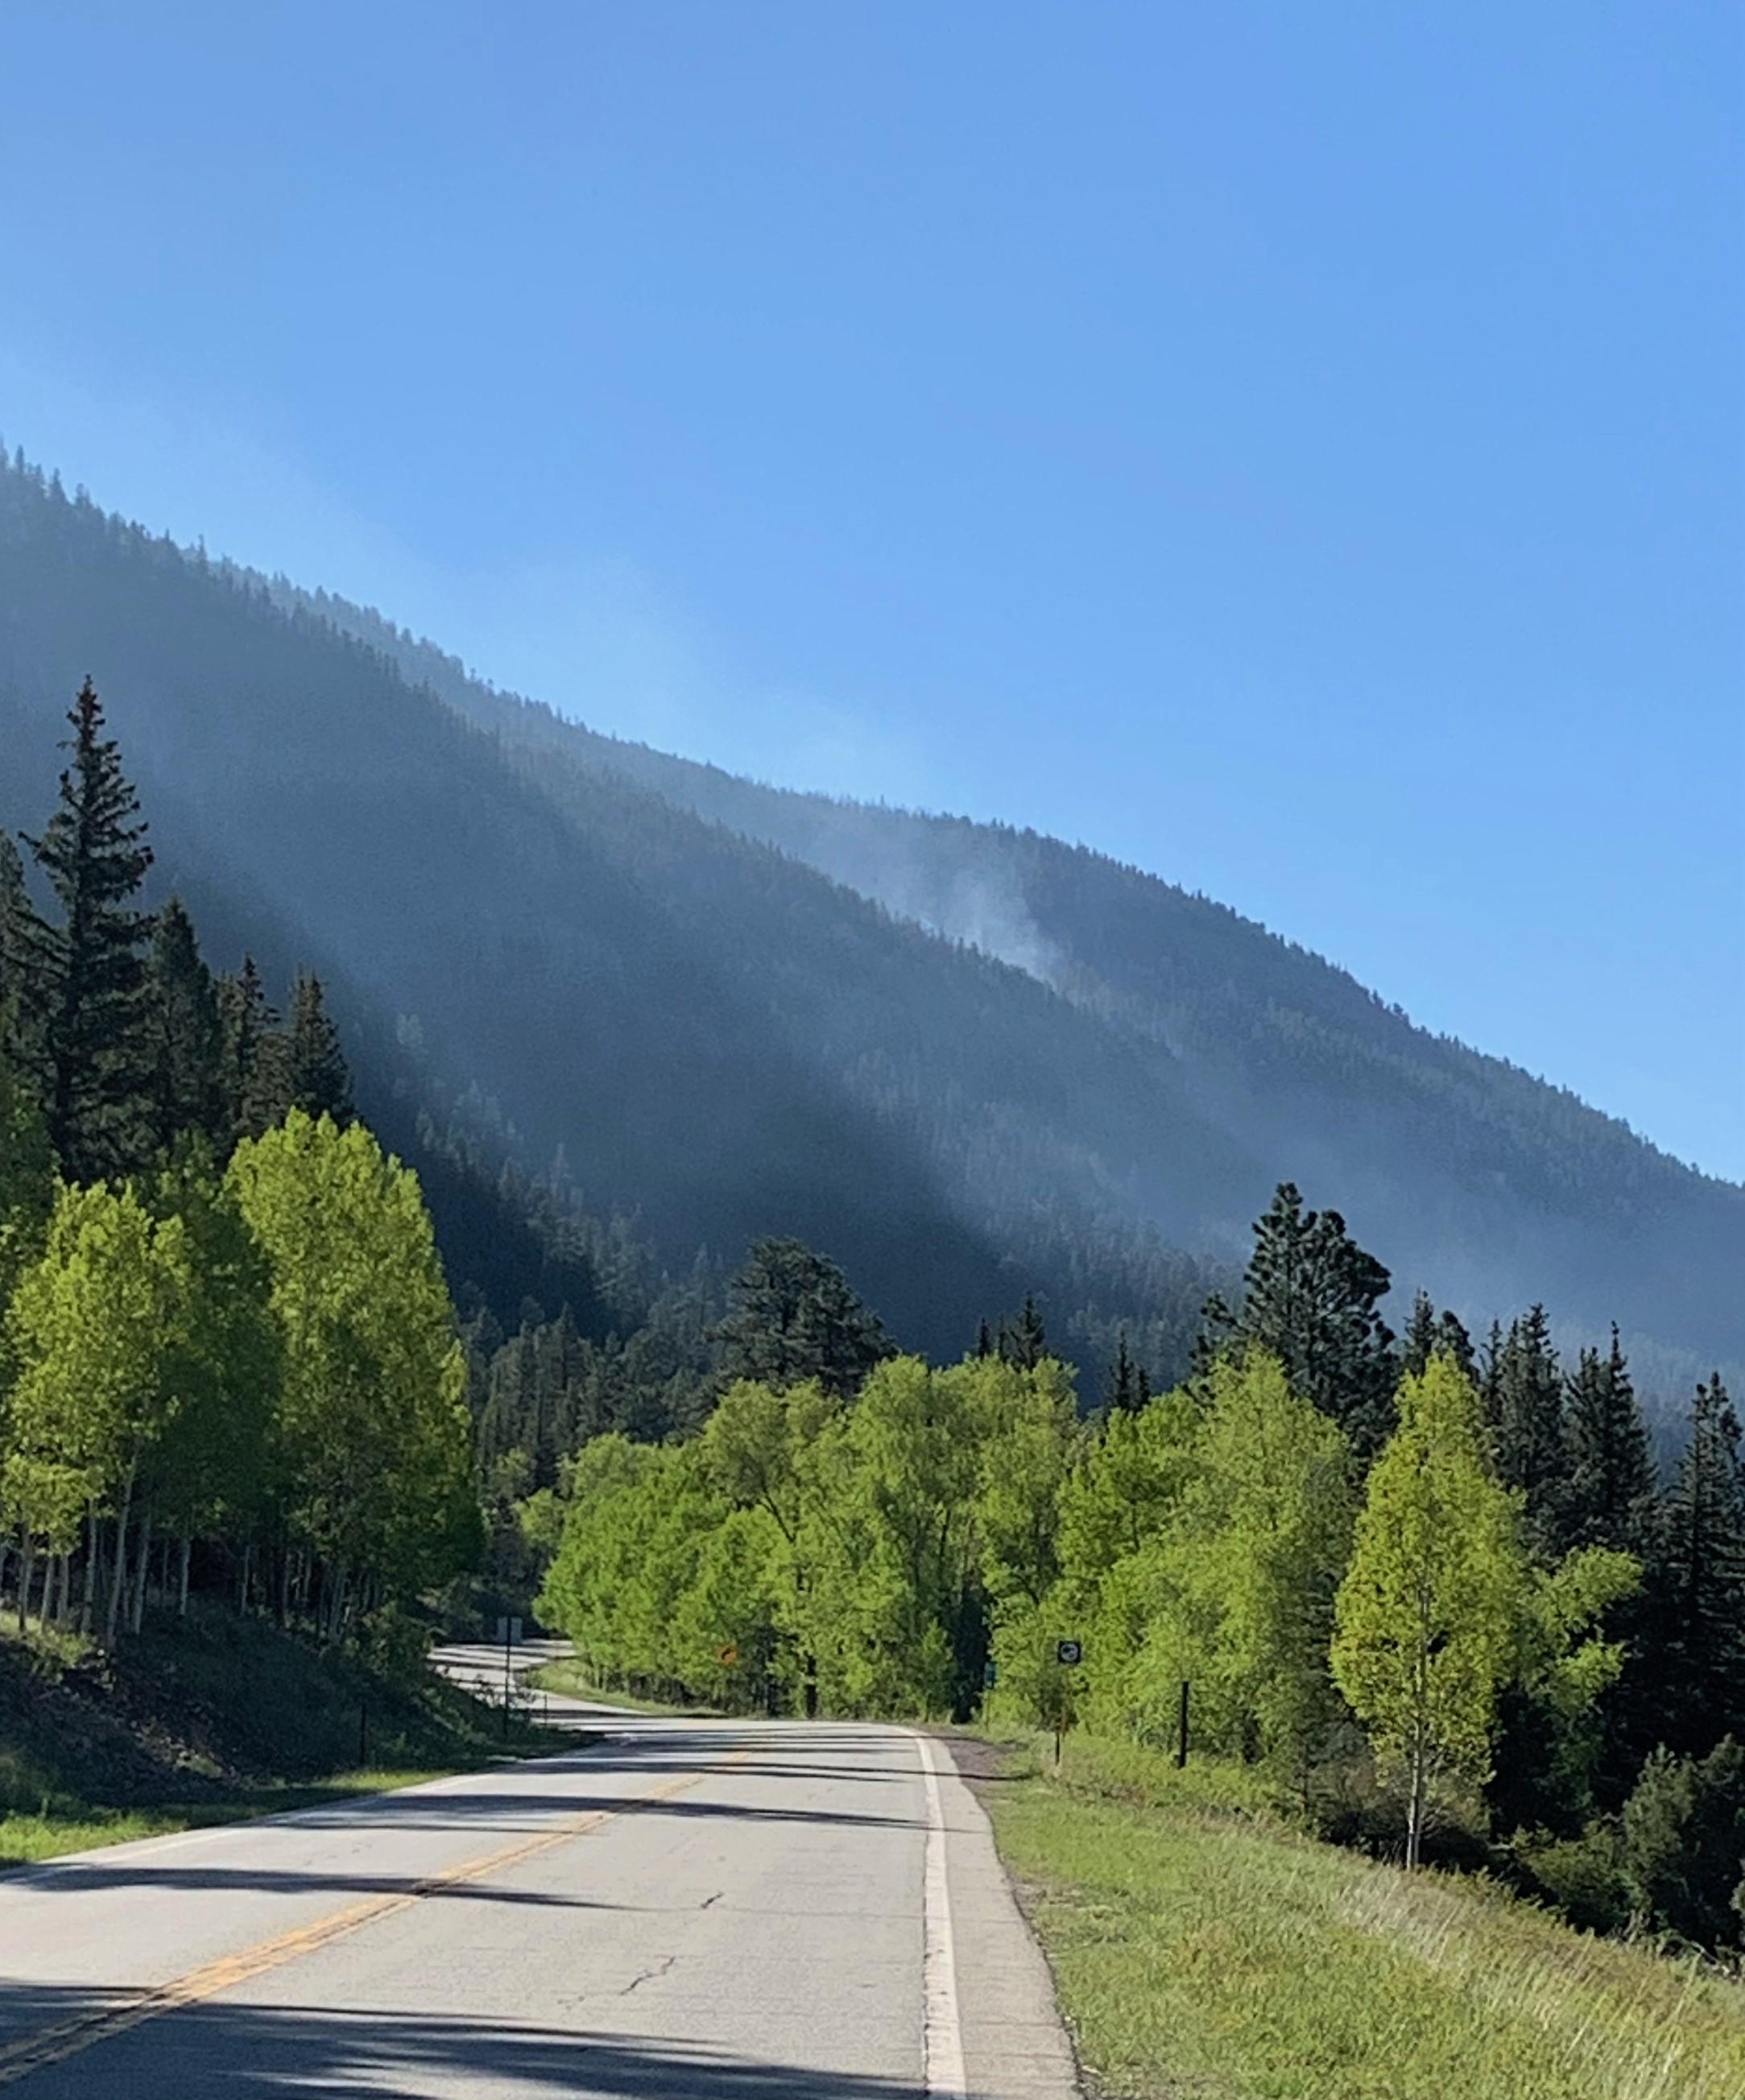 Light smoke drifts above the forest canopy on the steep slopes above highway 17.